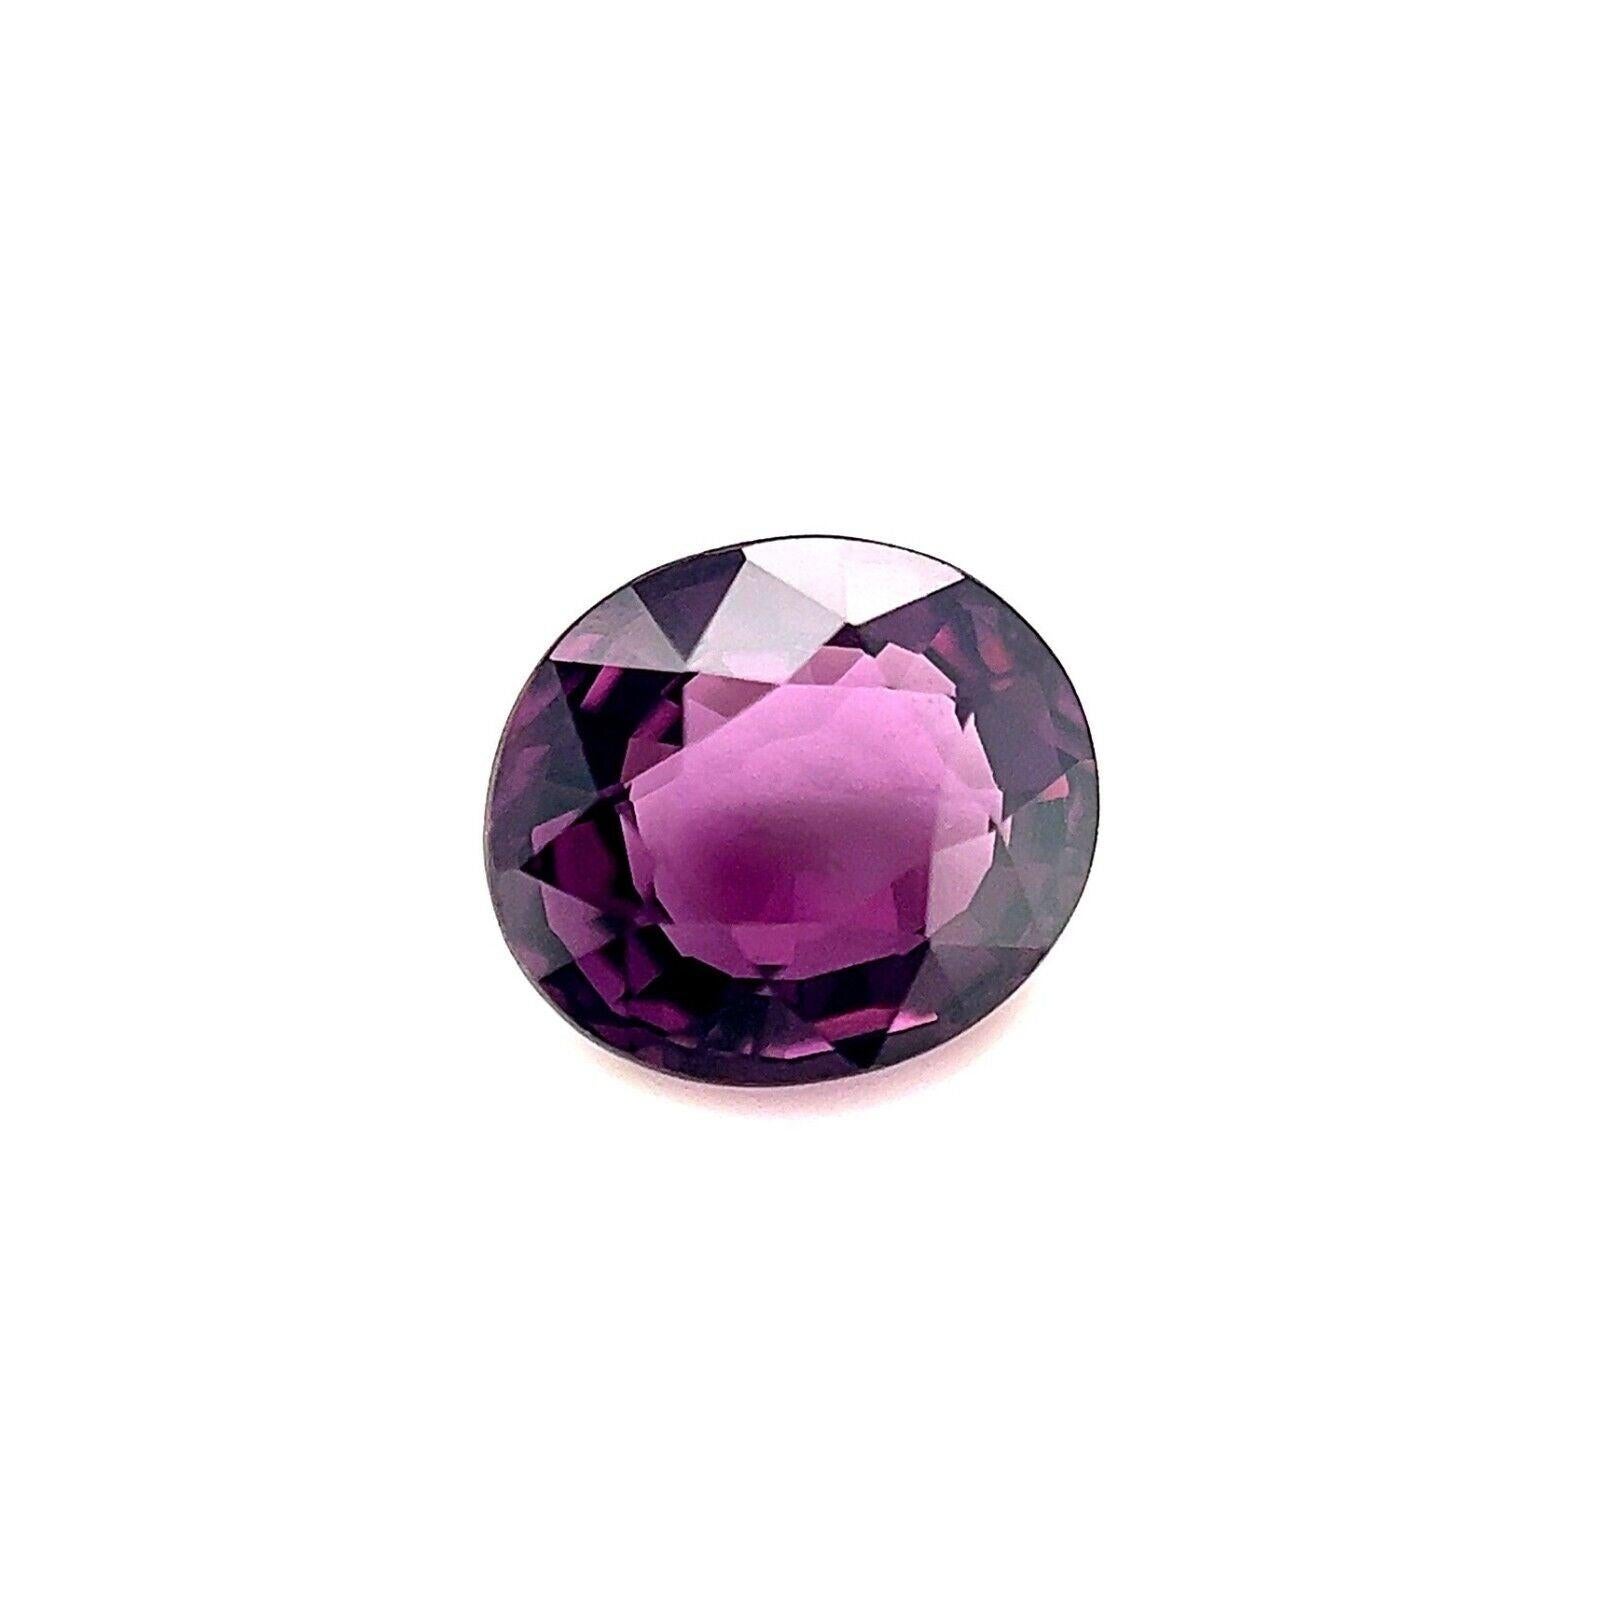 1.91ct Fine Deep Purple Spinel Natural Oval Cut 8x7mm Loose Rare Gem VS

Natural Deep Purple Spinel Gemstone.
Beautiful 1.91 Carat spinel with a deep purple colour. This spinel also has excellent clarity, VS.
A very clean stone with a very good oval